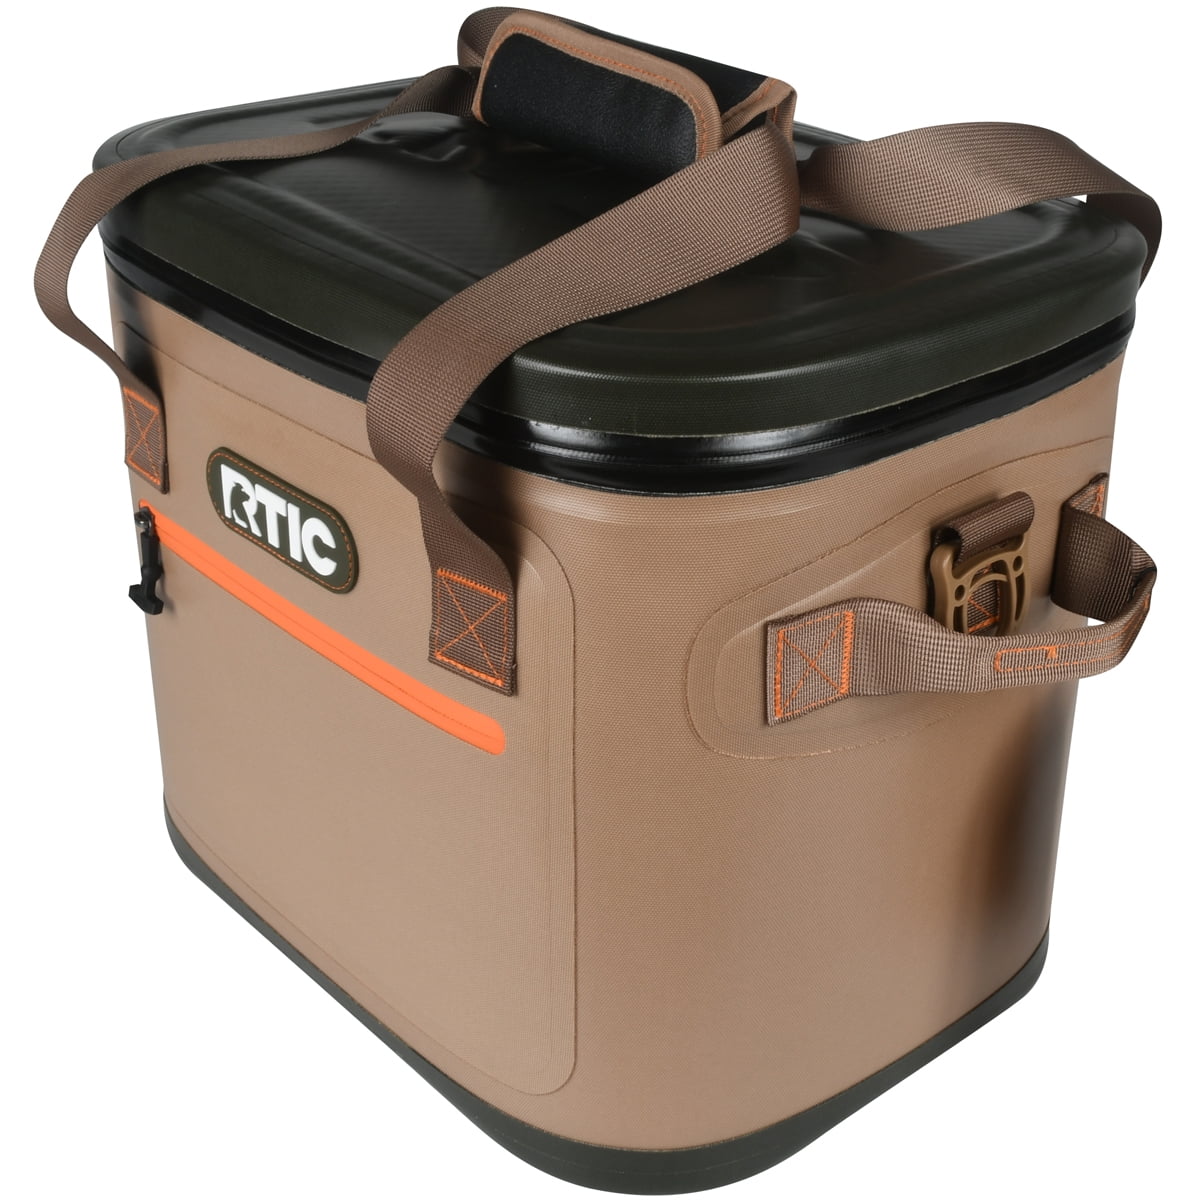 New RTIC Cooler Bag—Insulated Tan Hunting Back Pack—Holds 30 Cans—Fast Shipping! 